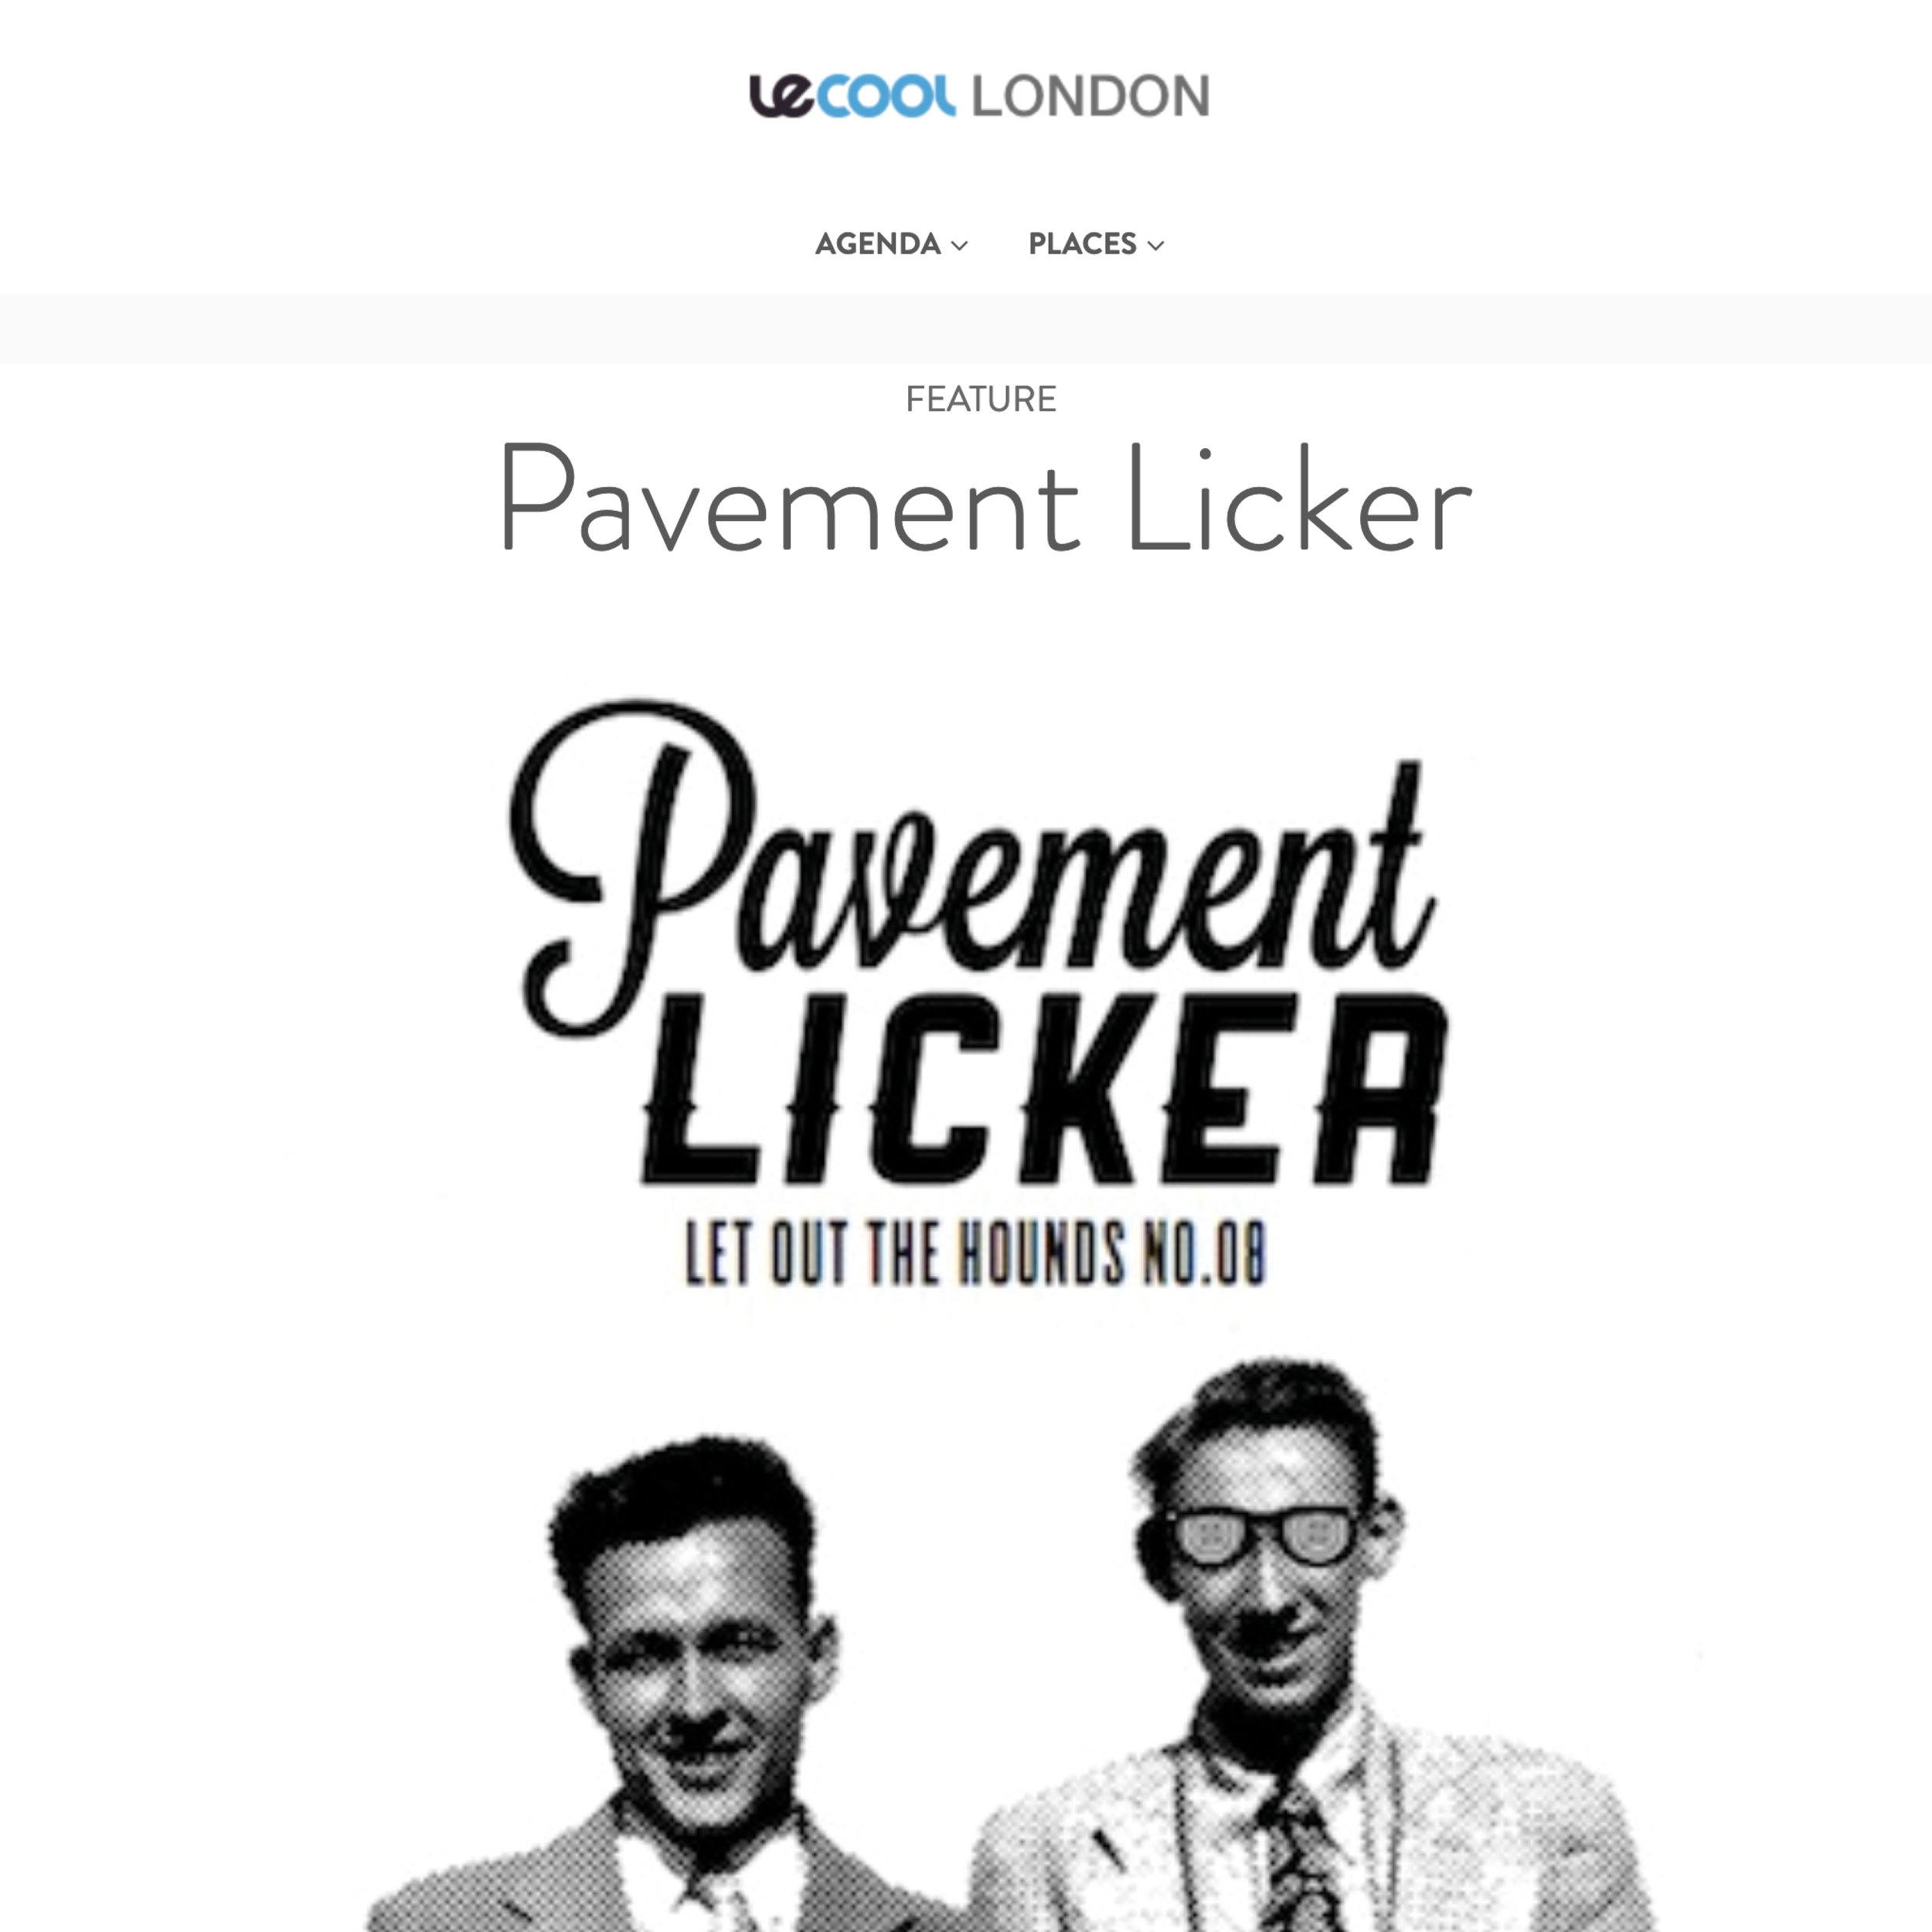 Pavement Licker featured by Le Cool London